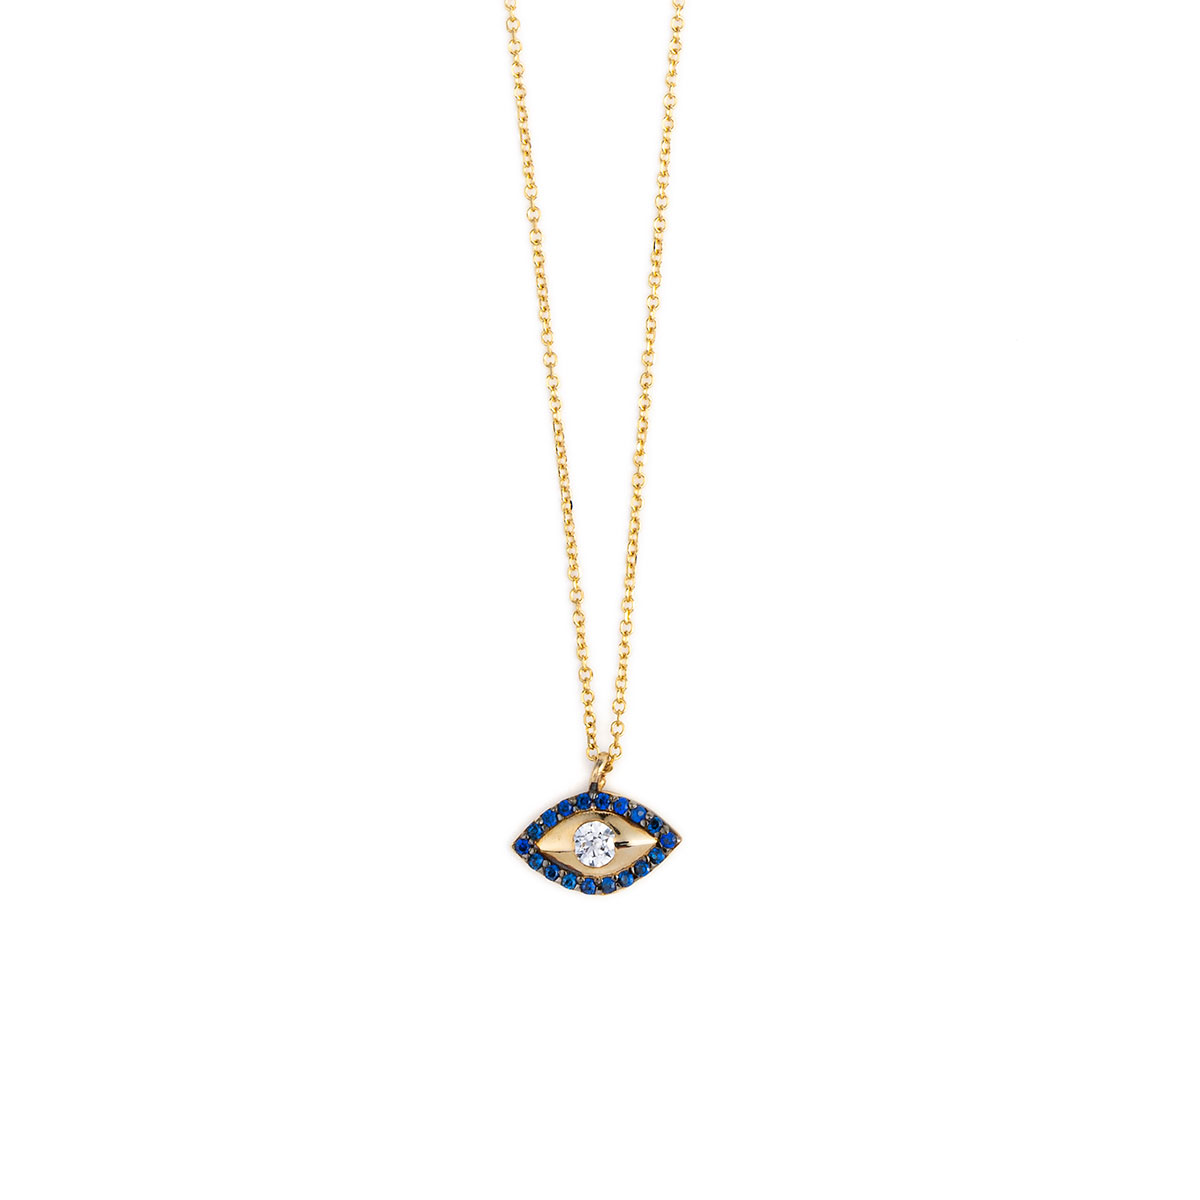 Eye Necklace – 14K Gold and Zircon